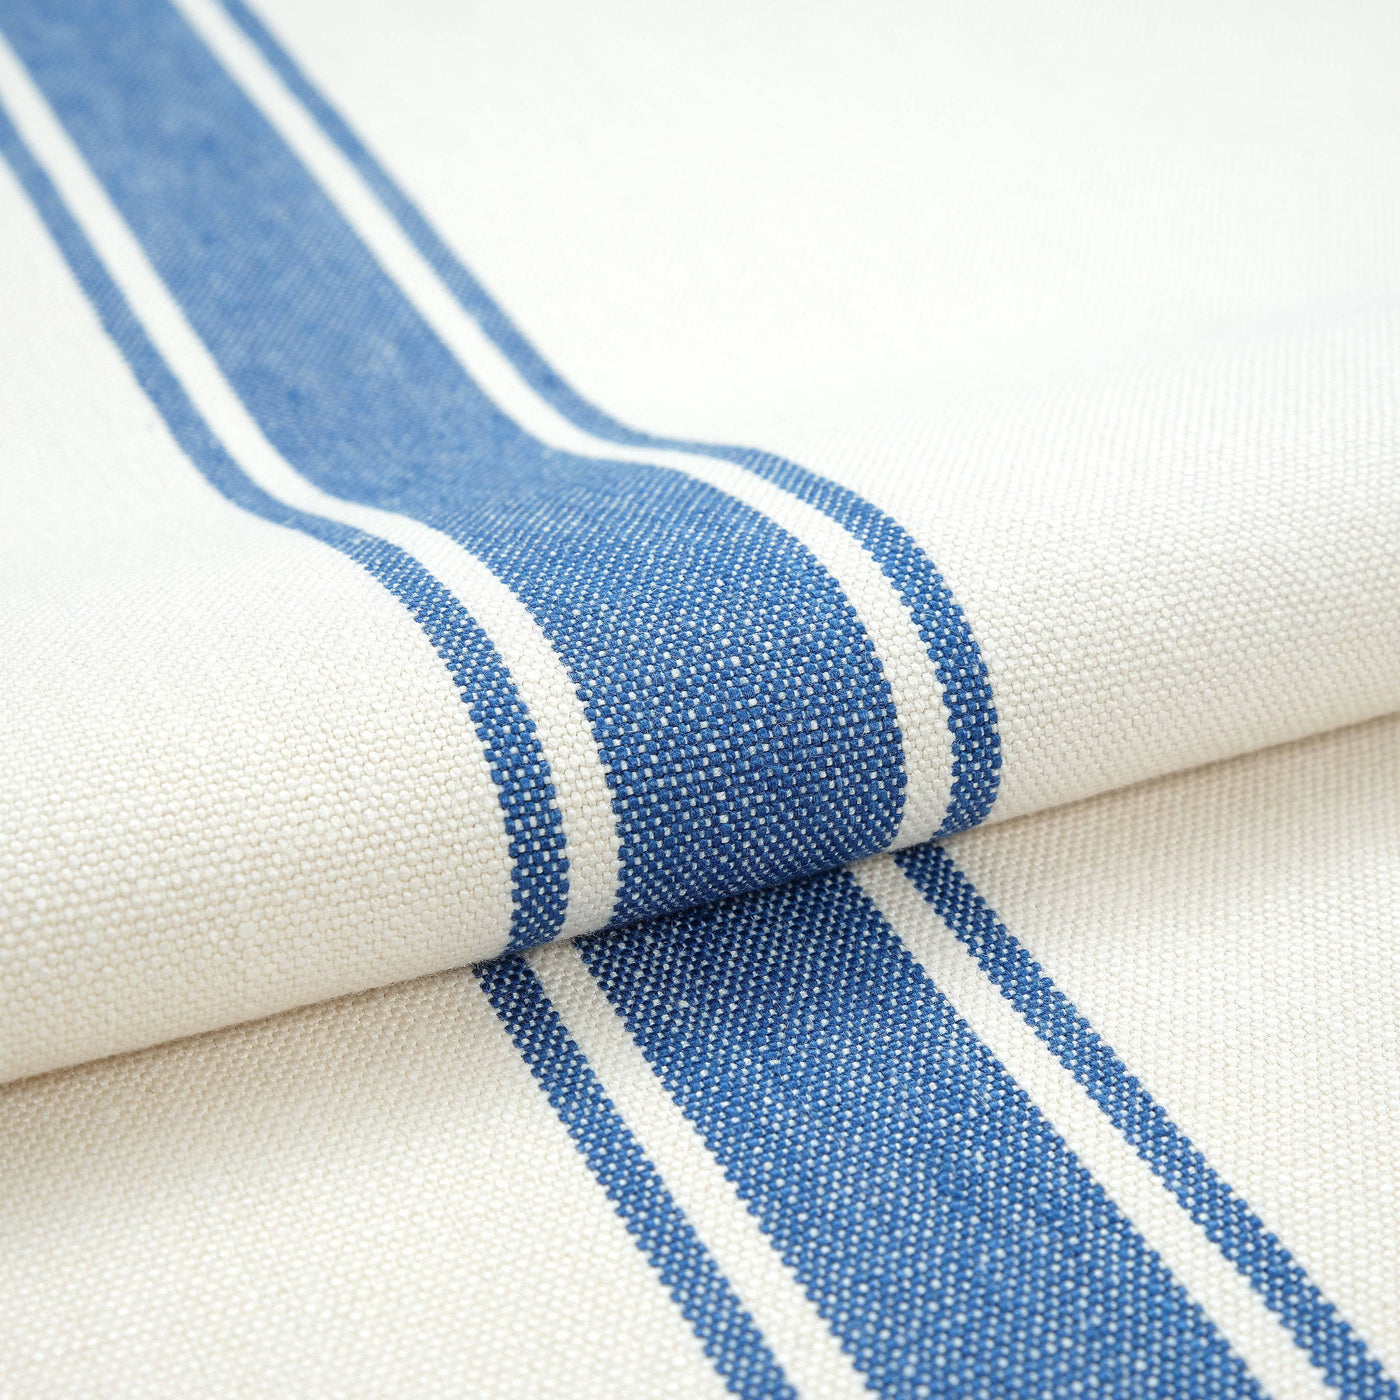 Mary Striped Runner, Natural - Blue, 46x150 cm 3